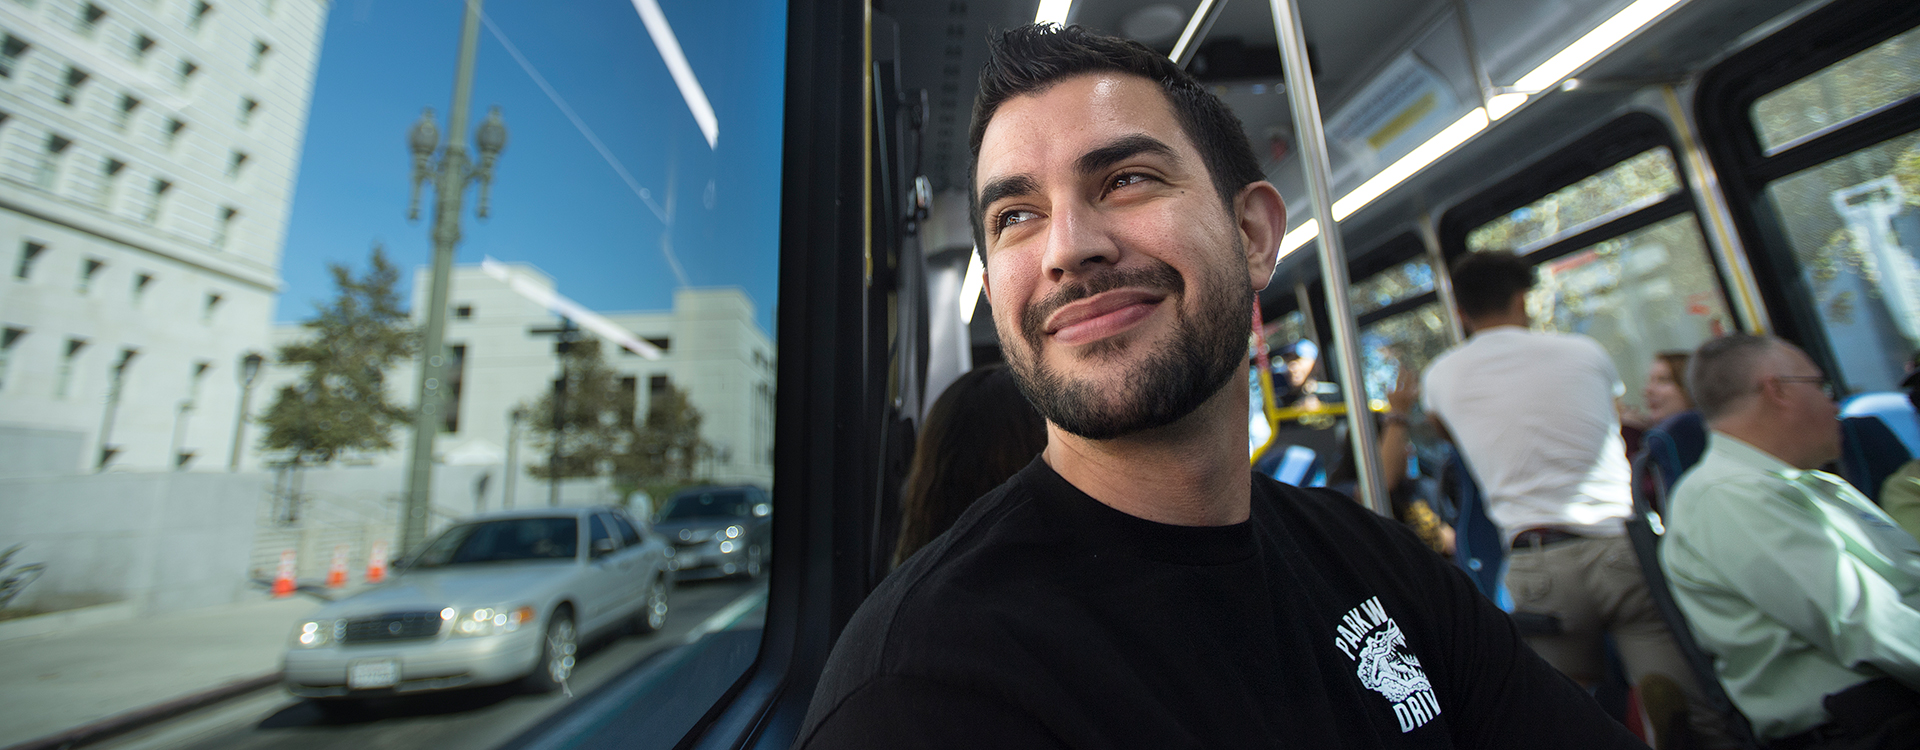 Male smiling looking out the window while on a Foothill Transit bus.